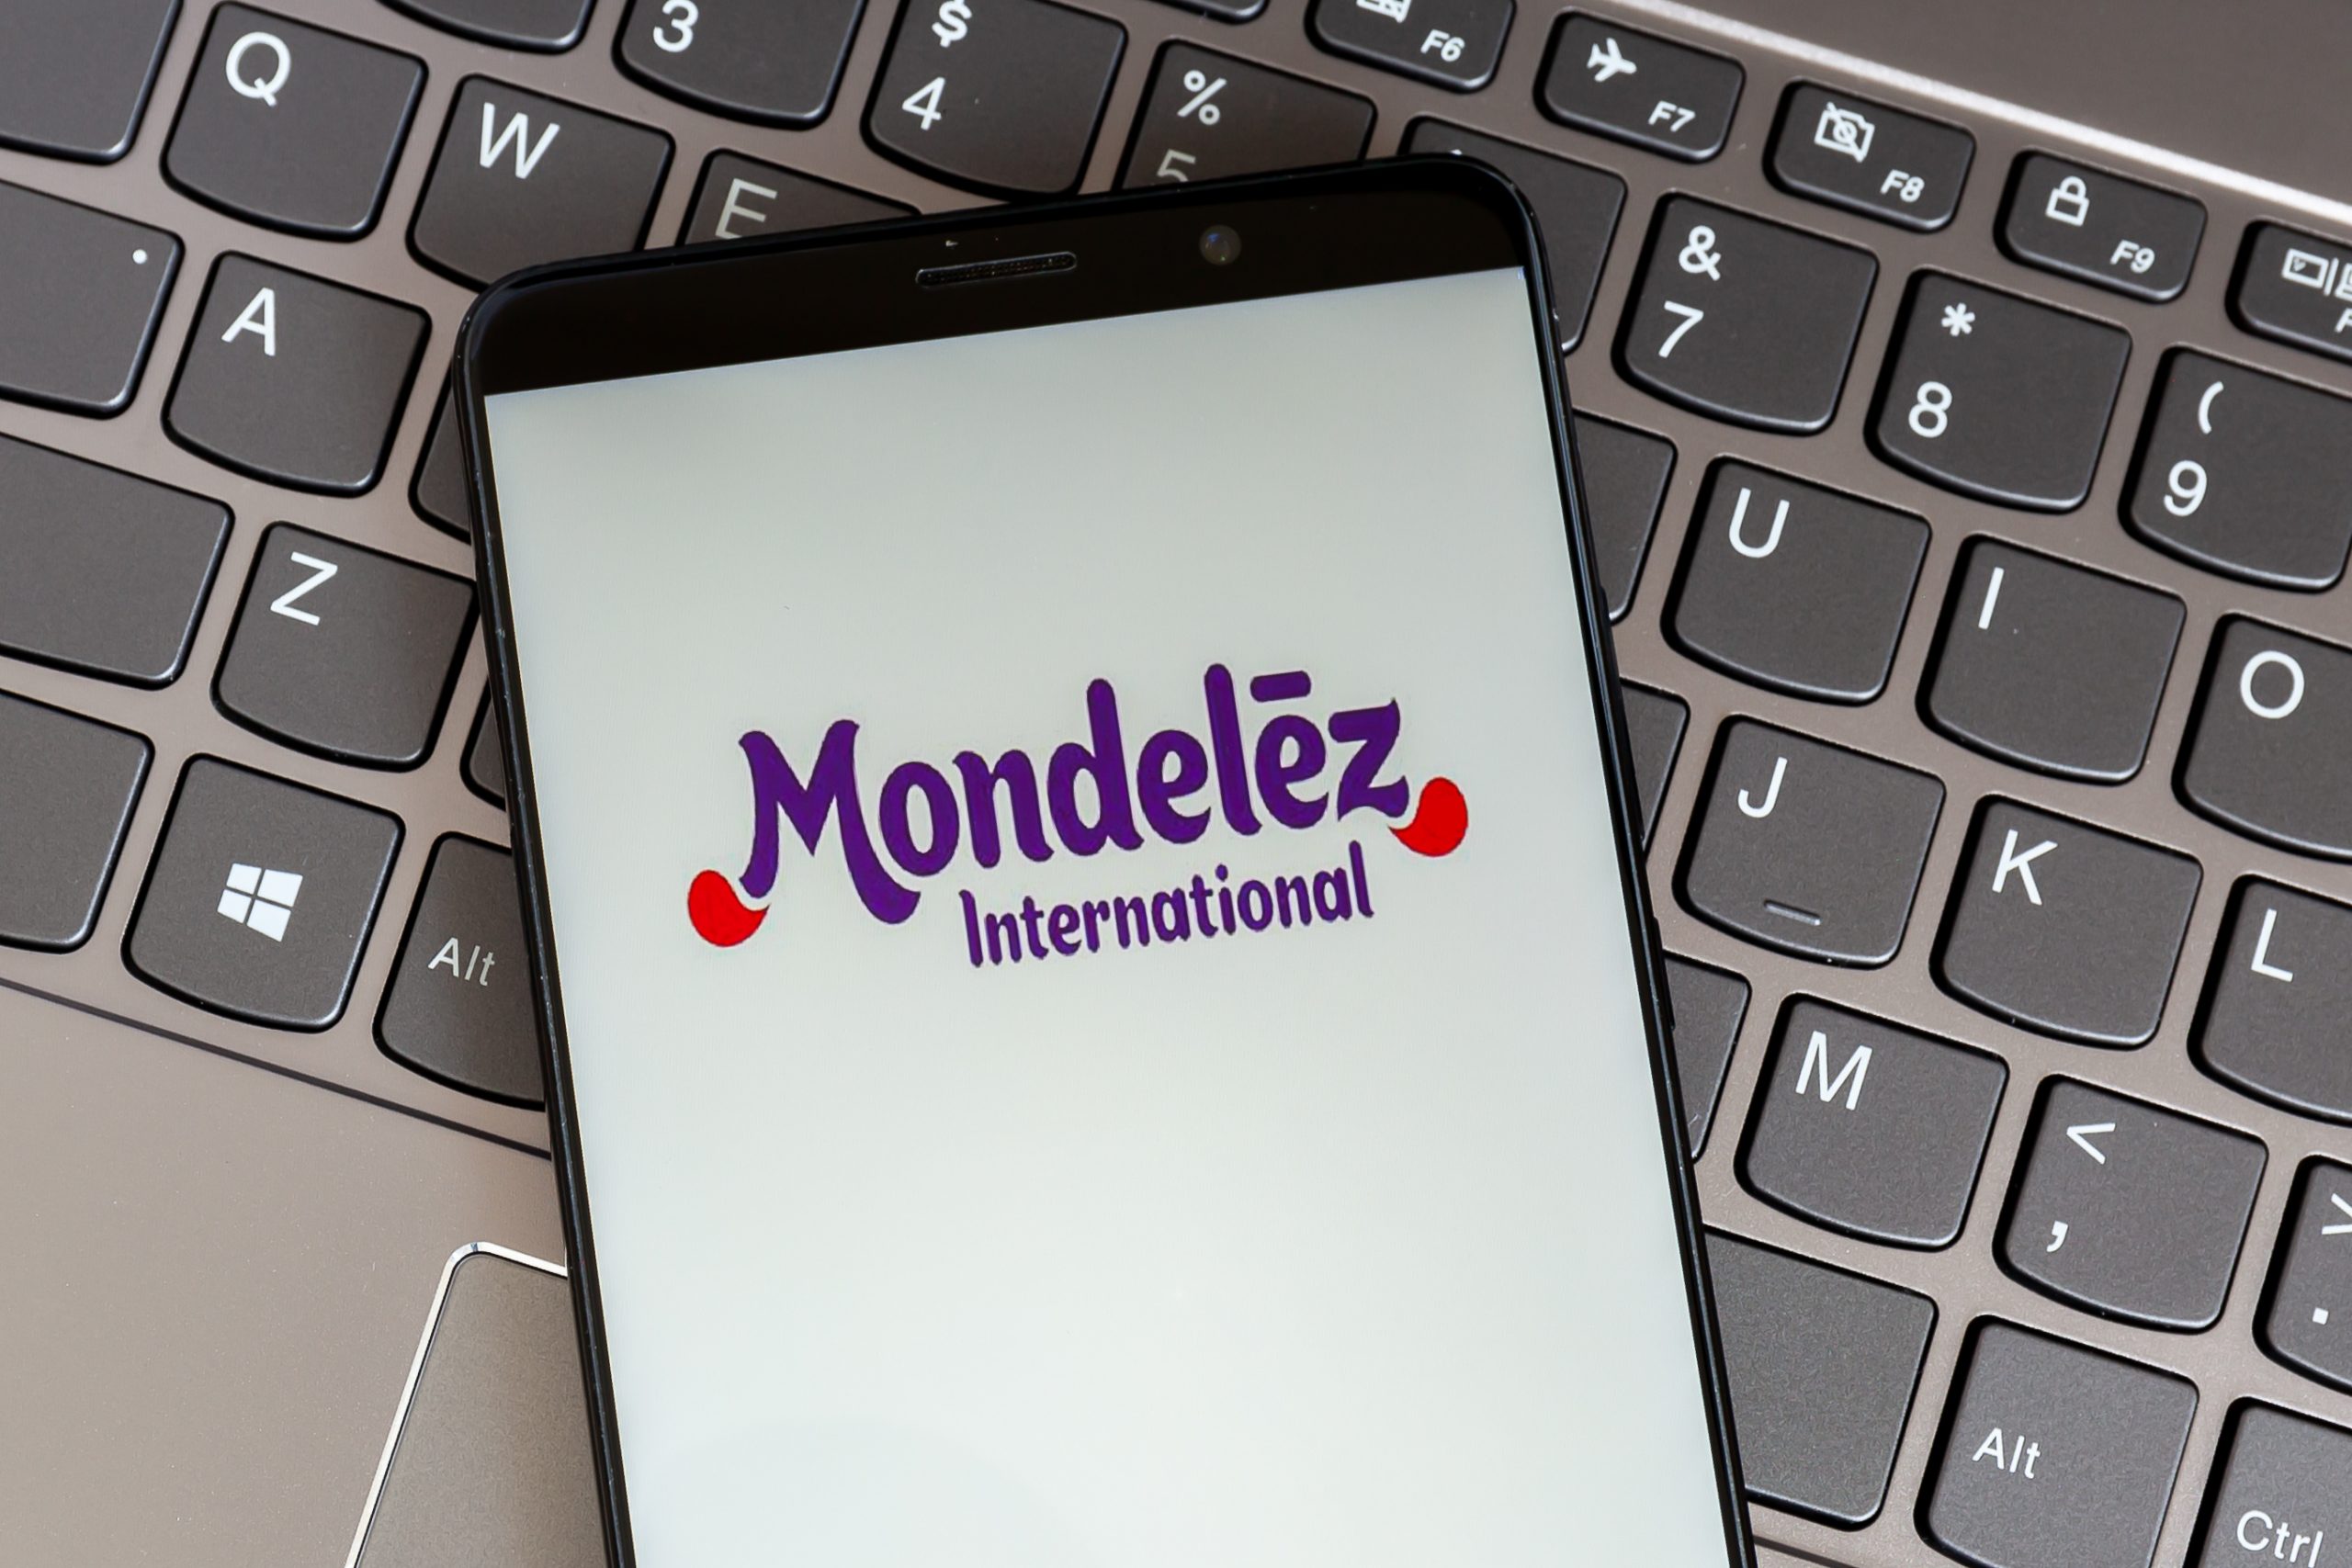 Mondelez logo displayed on a cellphone screen that sits on top of a computer keyboard